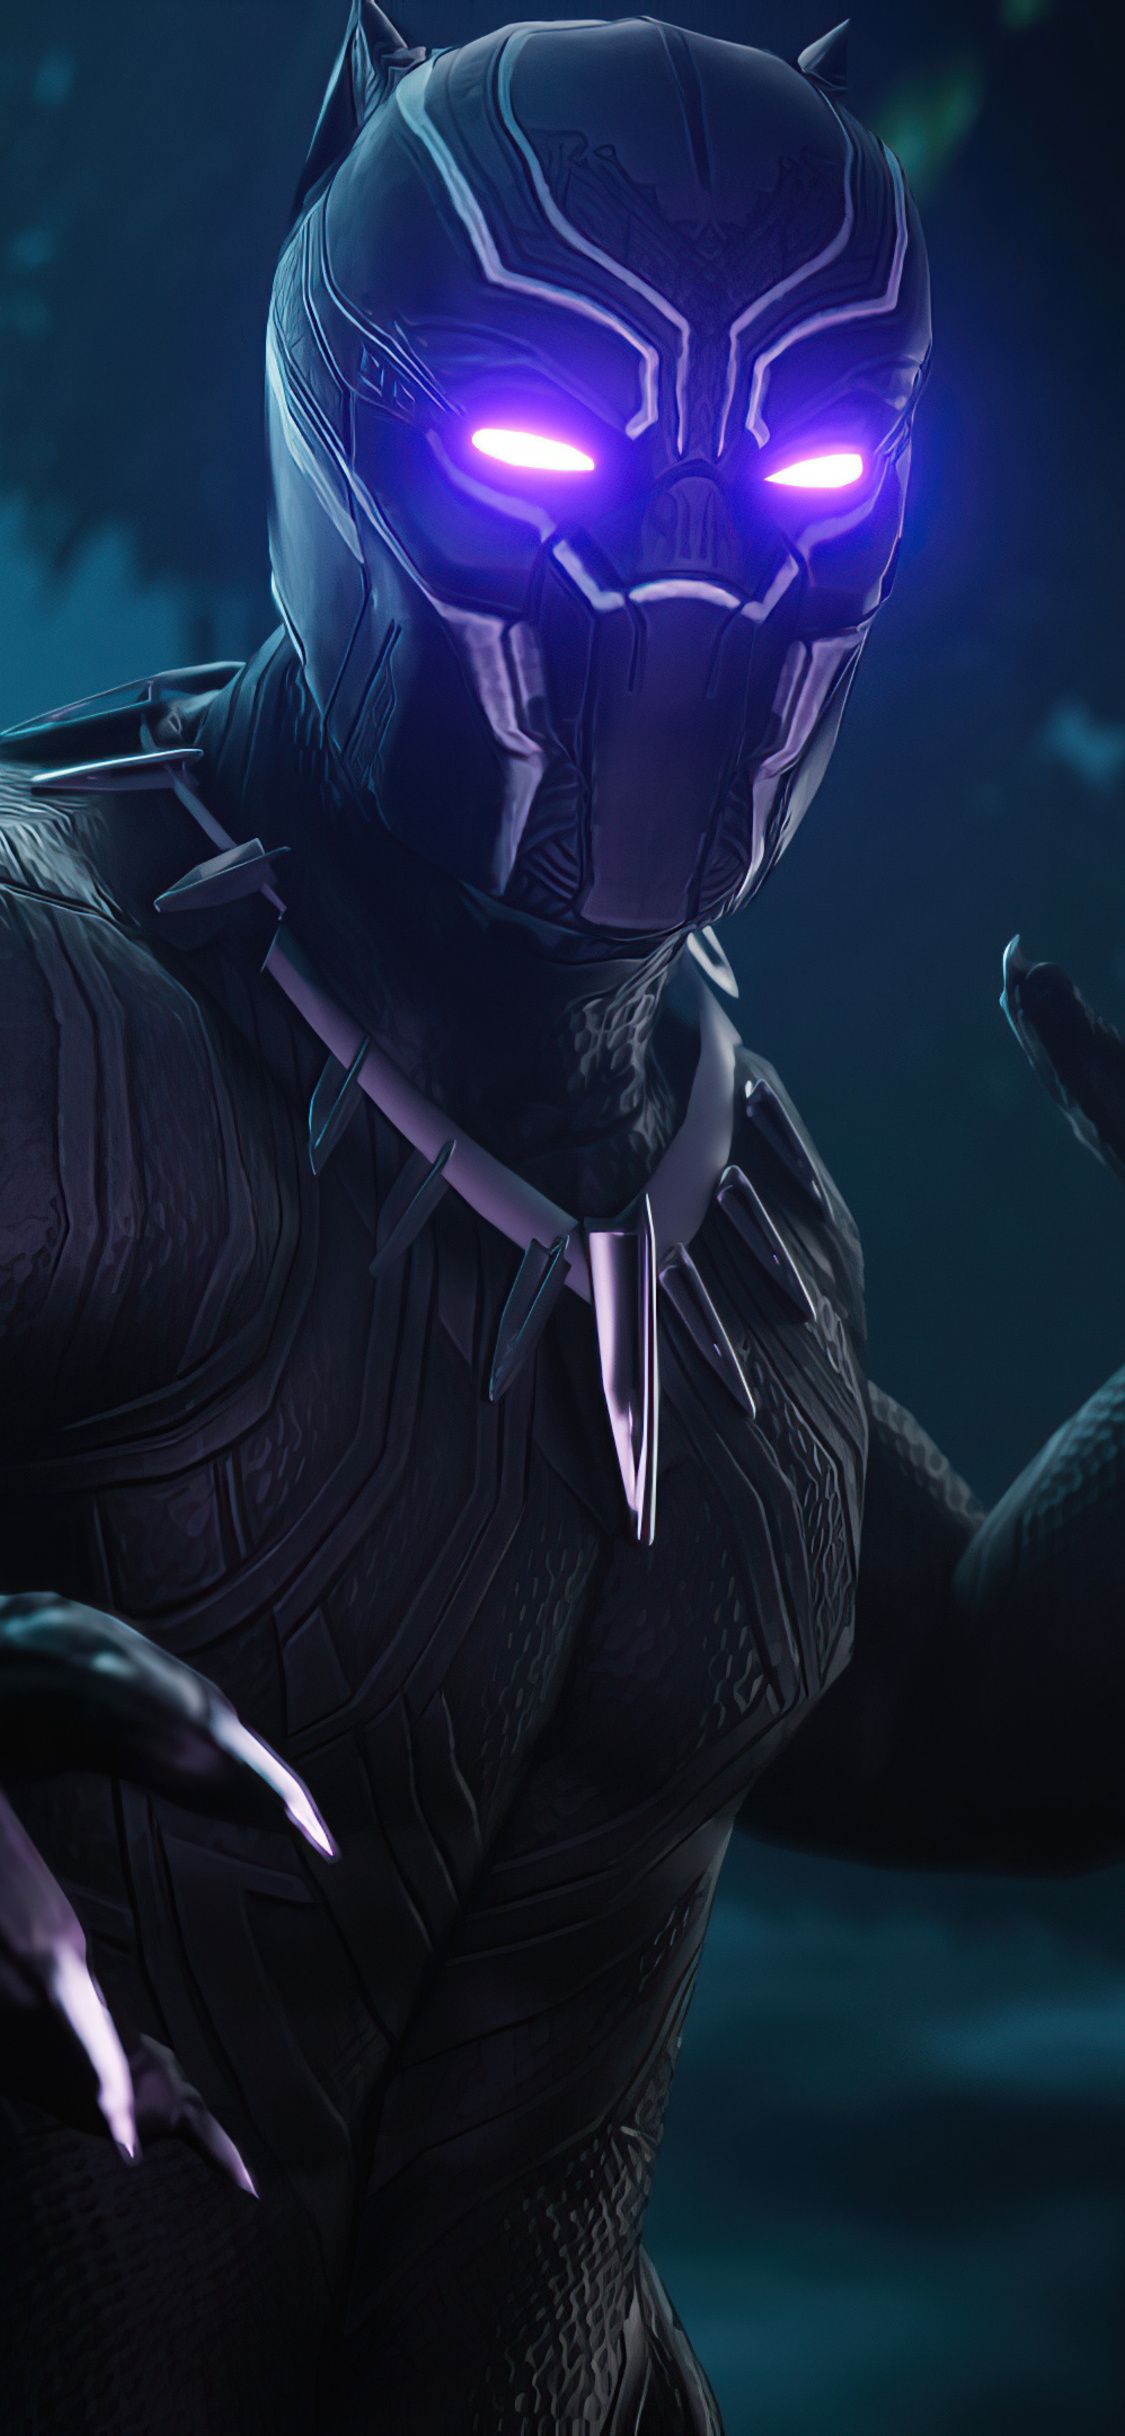 Black Fortnite Wallpapers Black Panther In Fortnite Wallpapers Wallpaper Cave